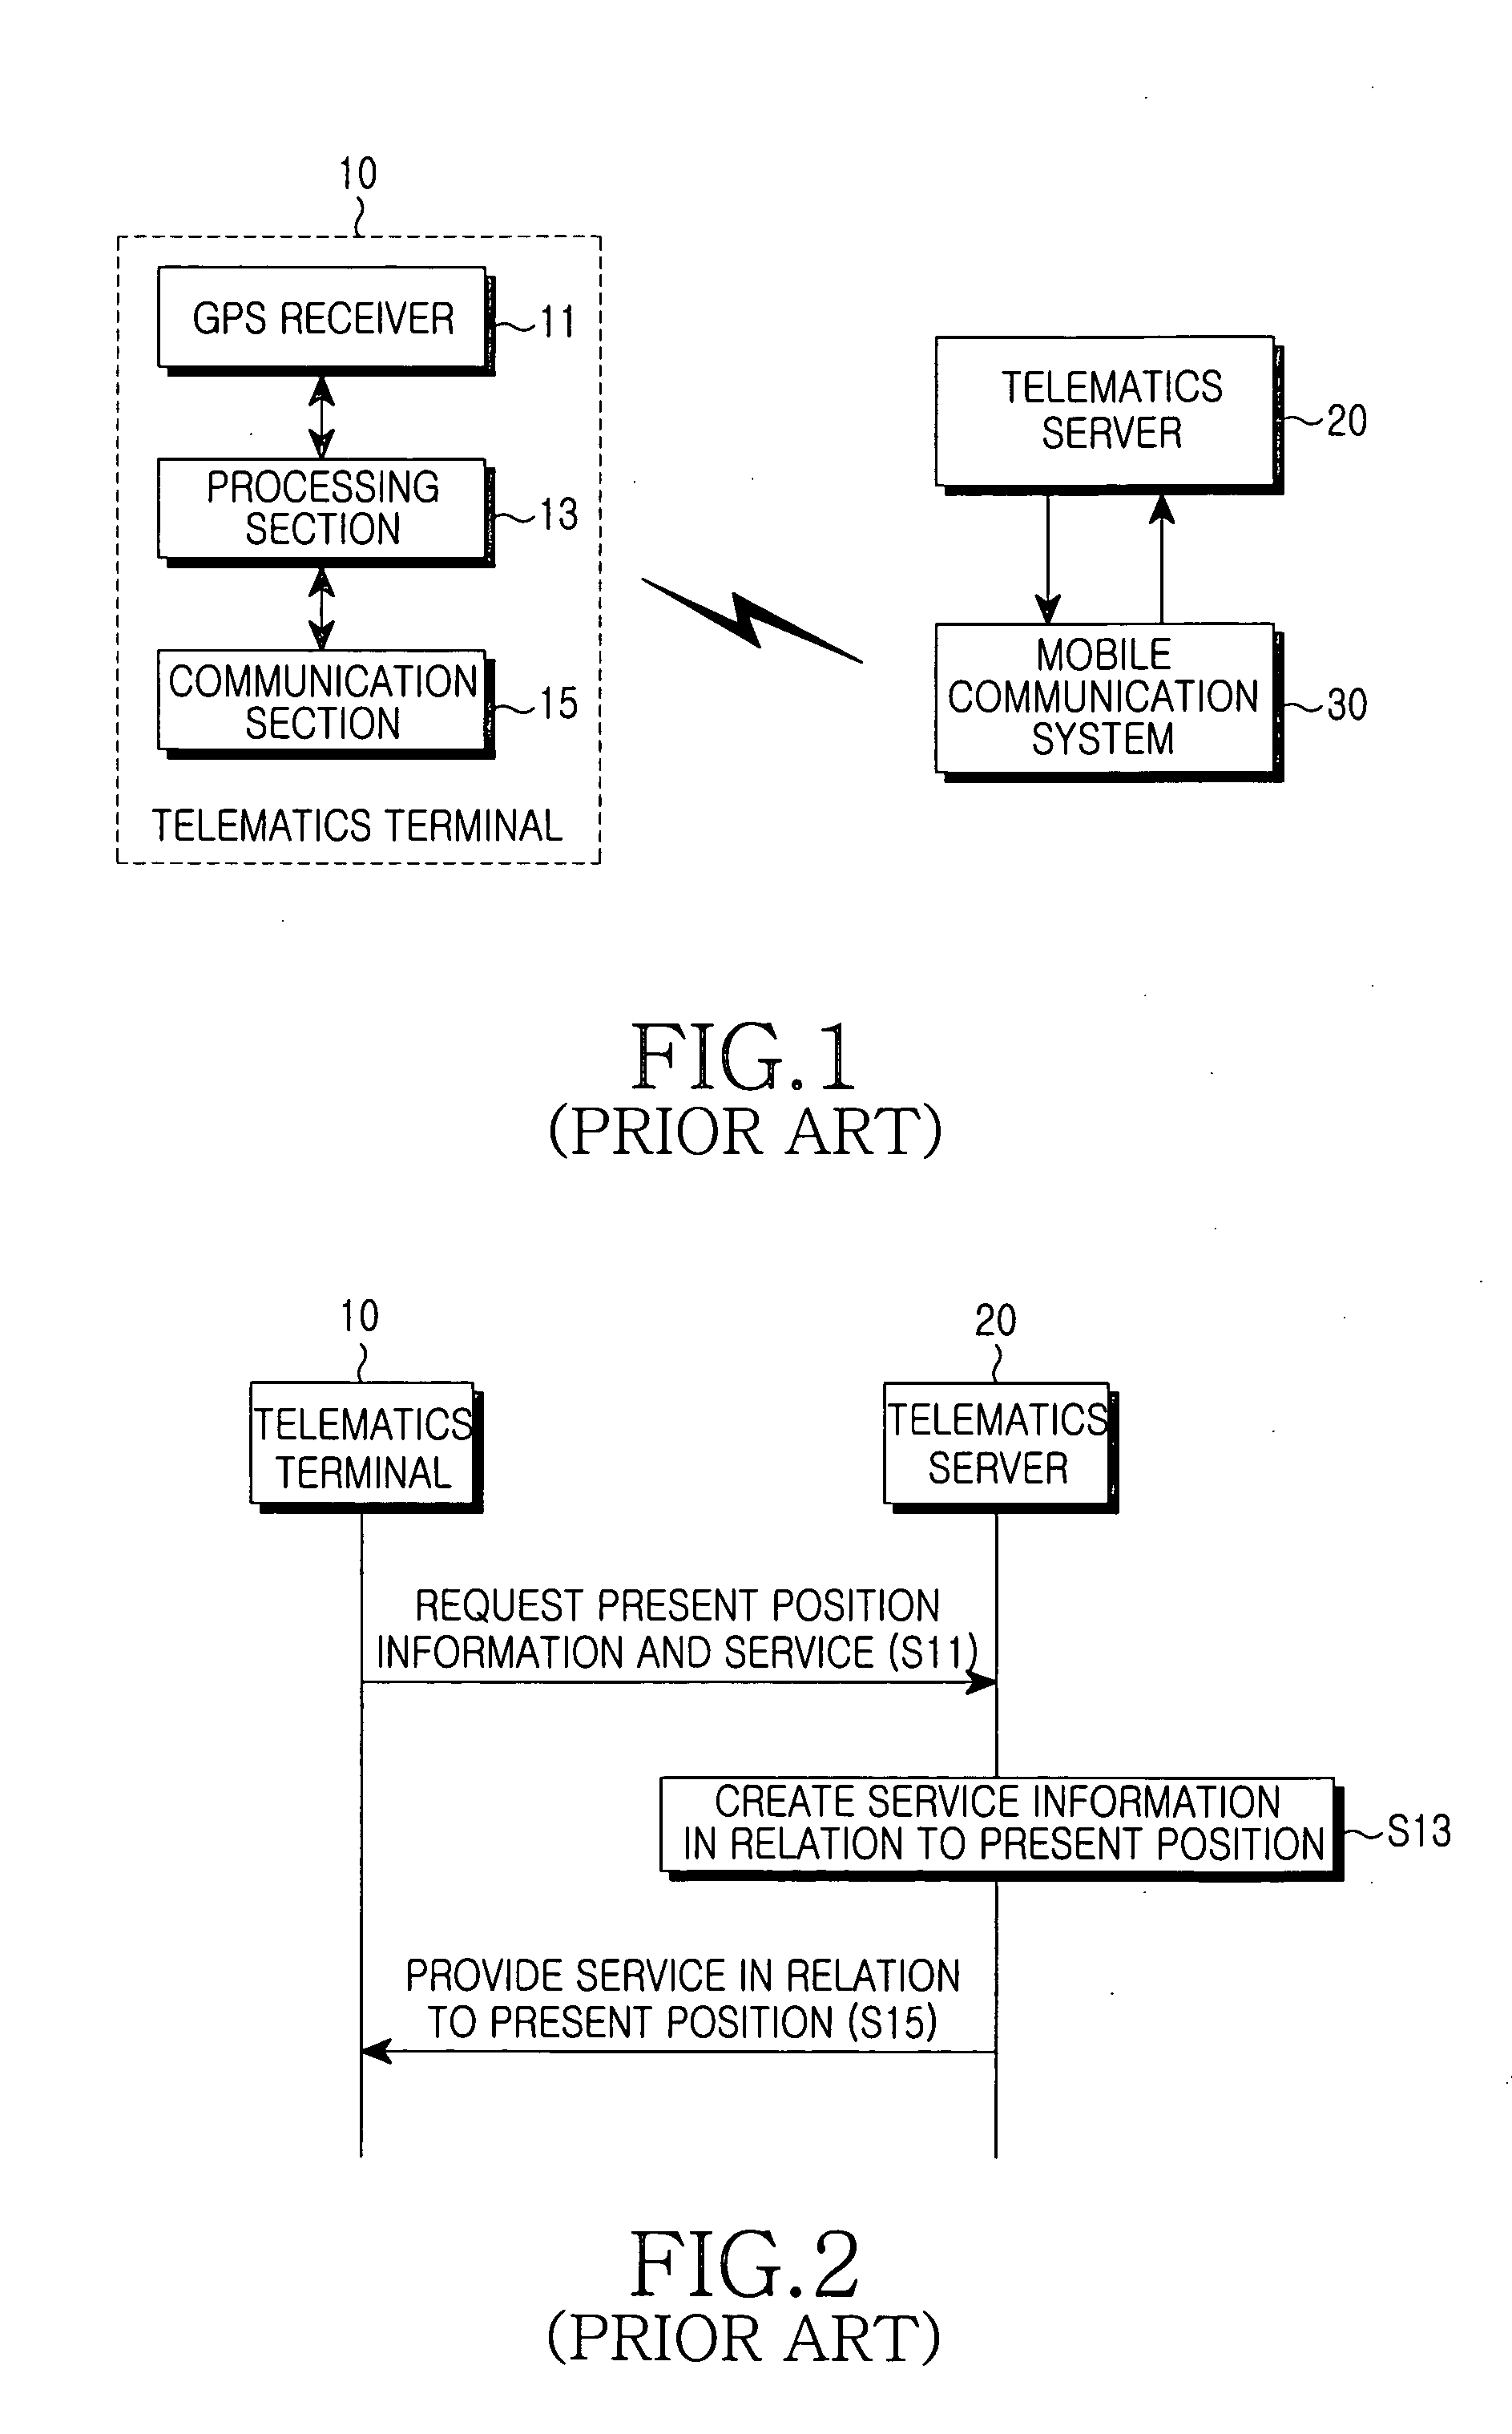 Apparatus and method for providing a telematics service having and AGPS function